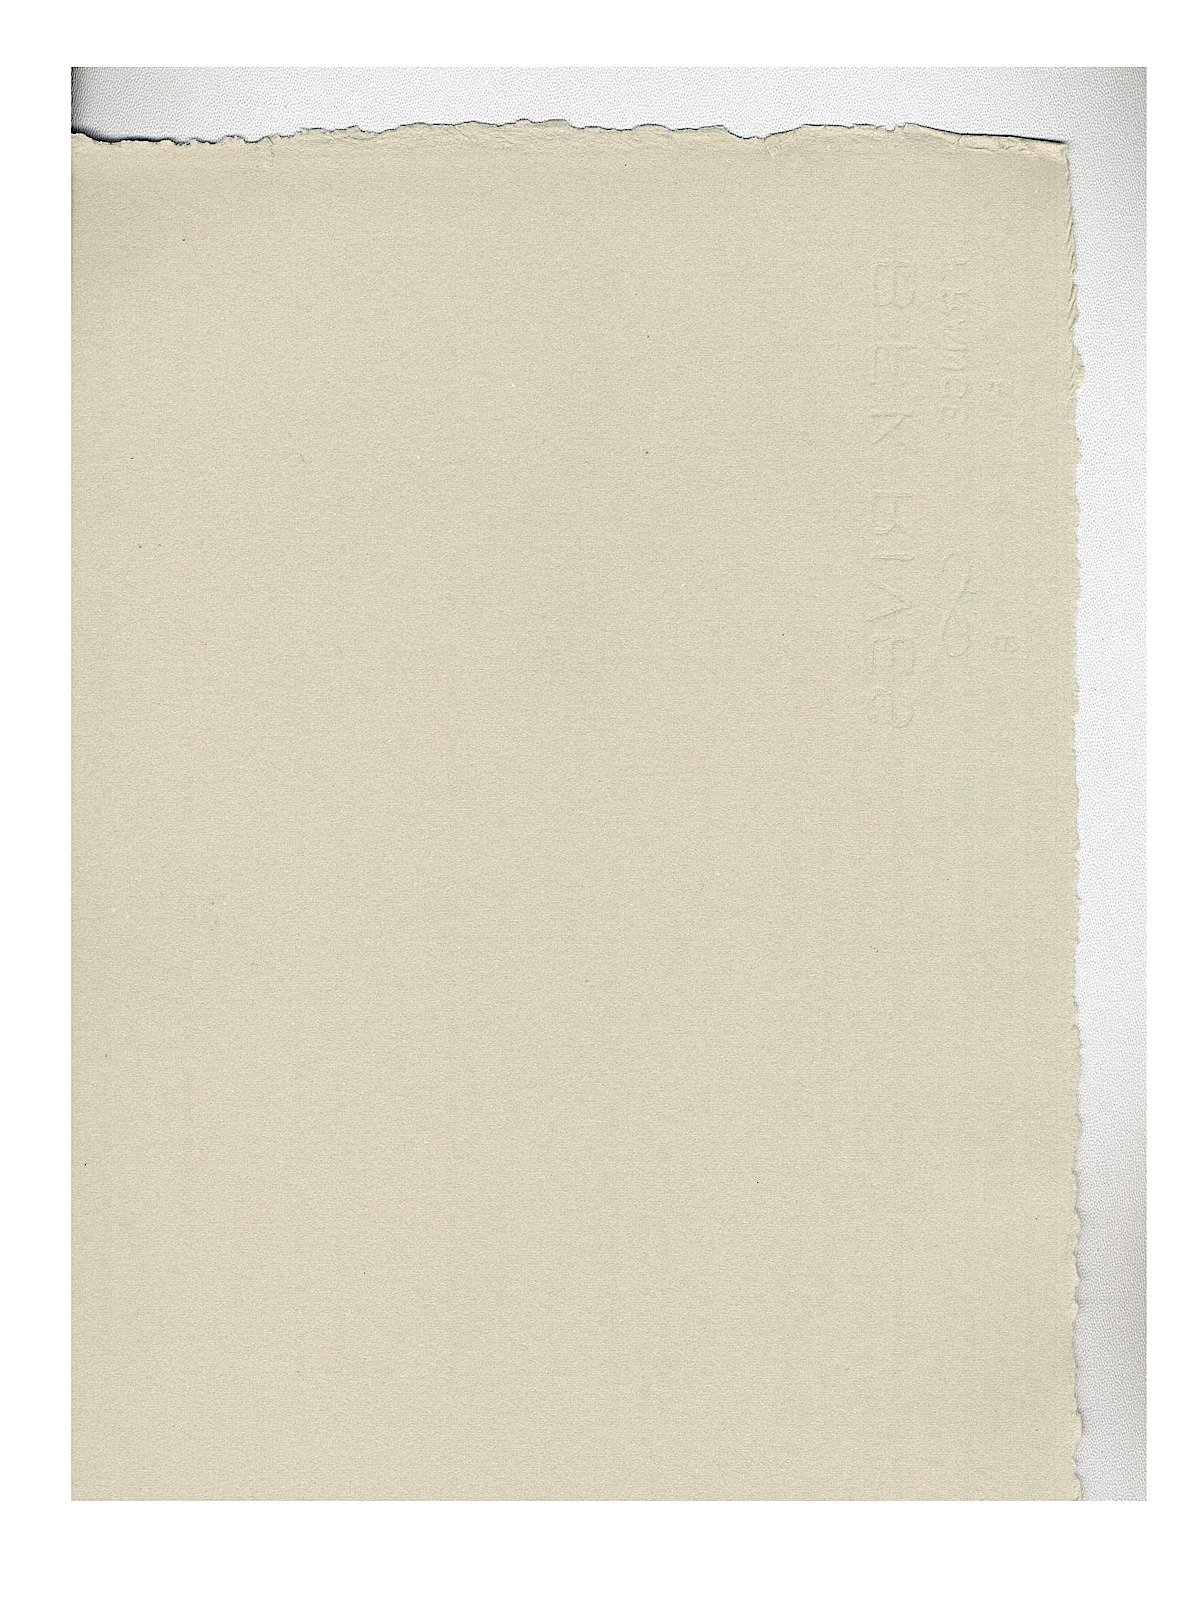 Arches Rives Bfk Printmaking Paper 22 In. X 30 In. Sheet Cream 280